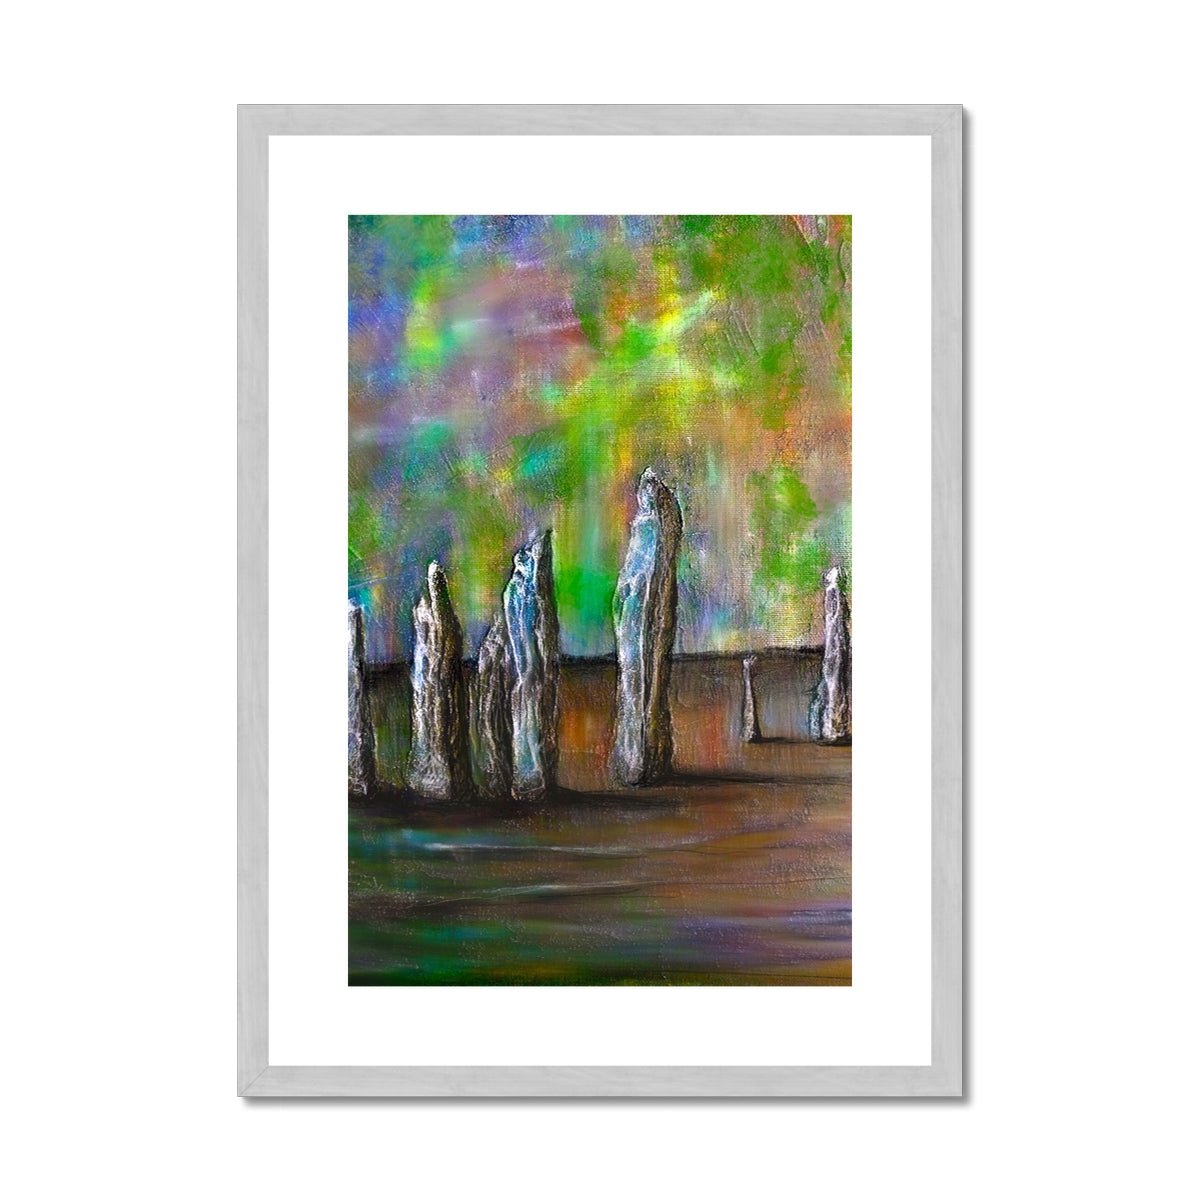 Callanish Northern Lights Lewis Painting | Antique Framed & Mounted Prints From Scotland-Antique Framed & Mounted Prints-Hebridean Islands Art Gallery-A2 Portrait-Silver Frame-Paintings, Prints, Homeware, Art Gifts From Scotland By Scottish Artist Kevin Hunter